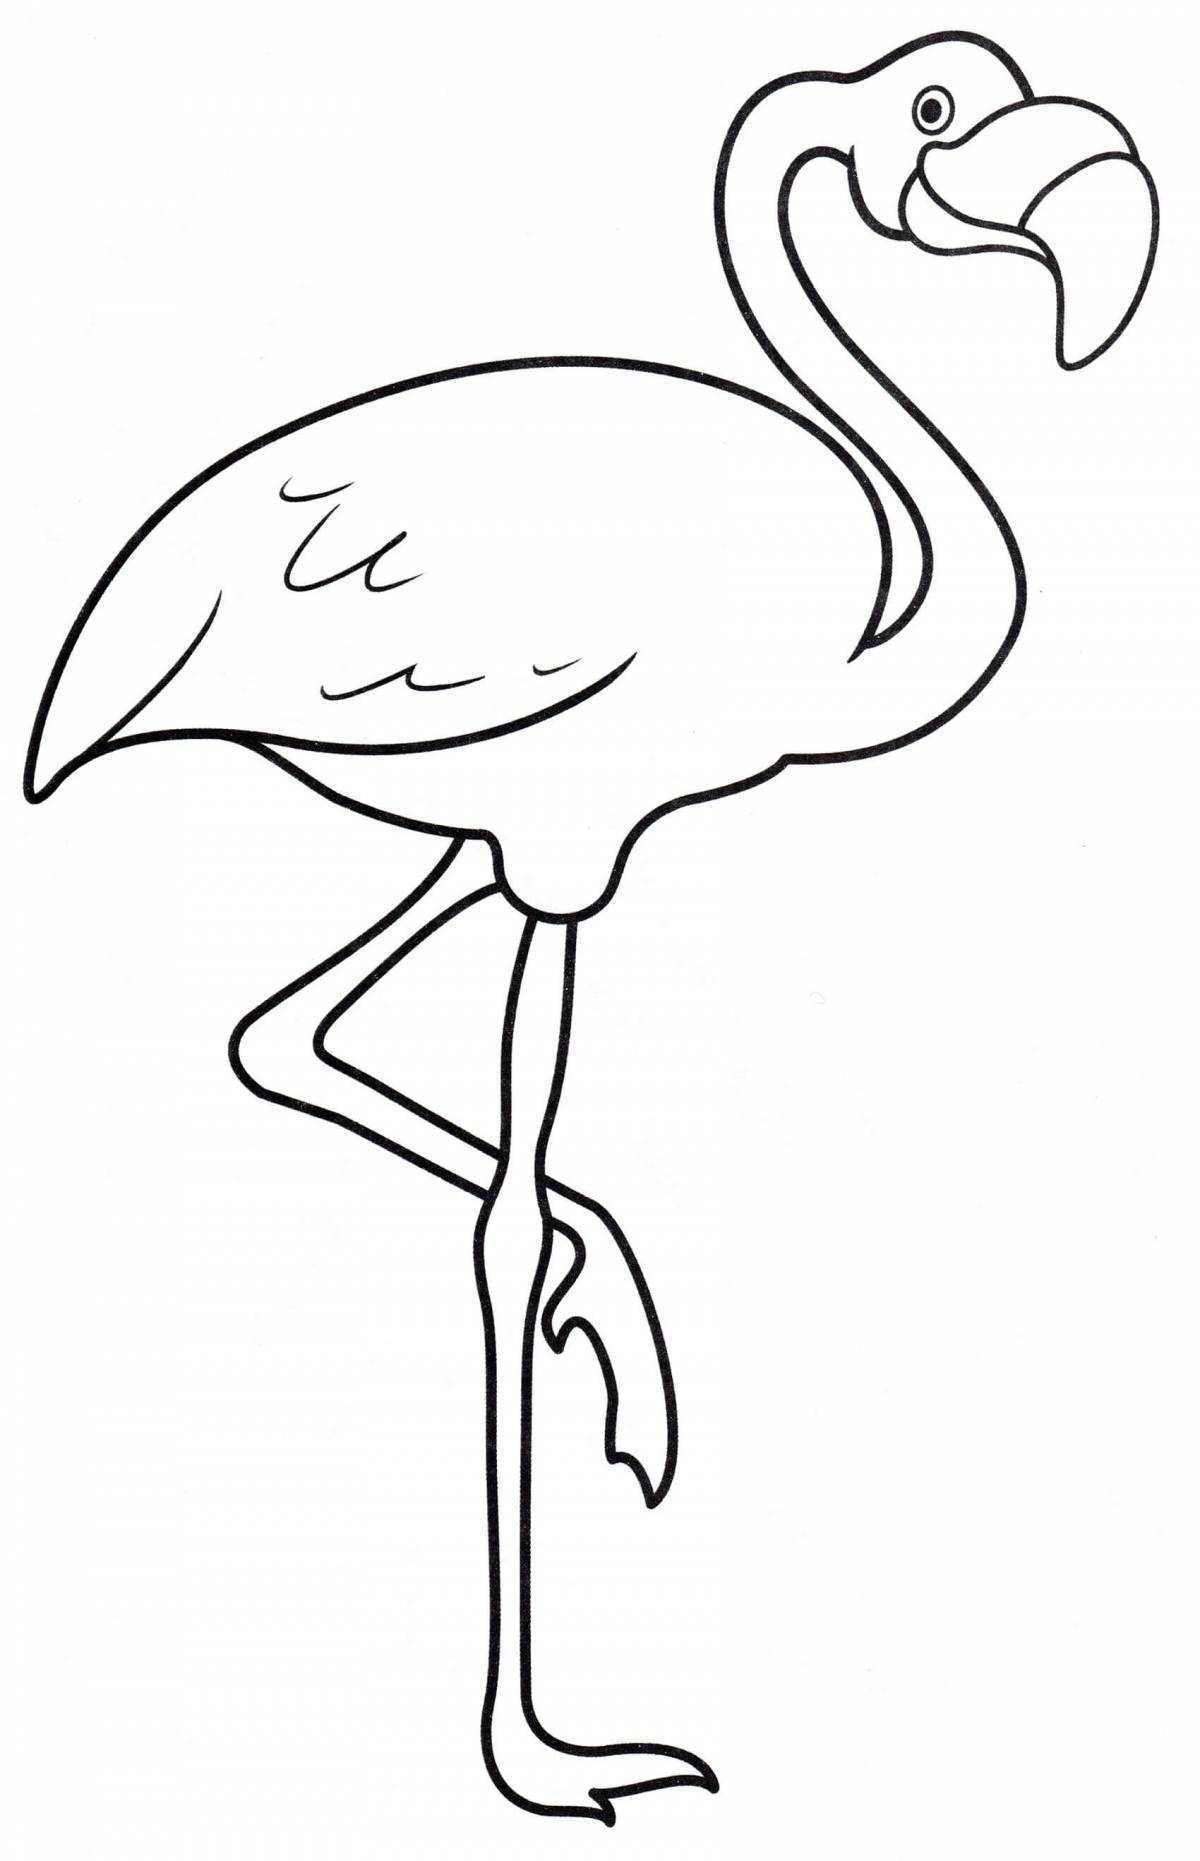 Fancy flamingo coloring pages for kids